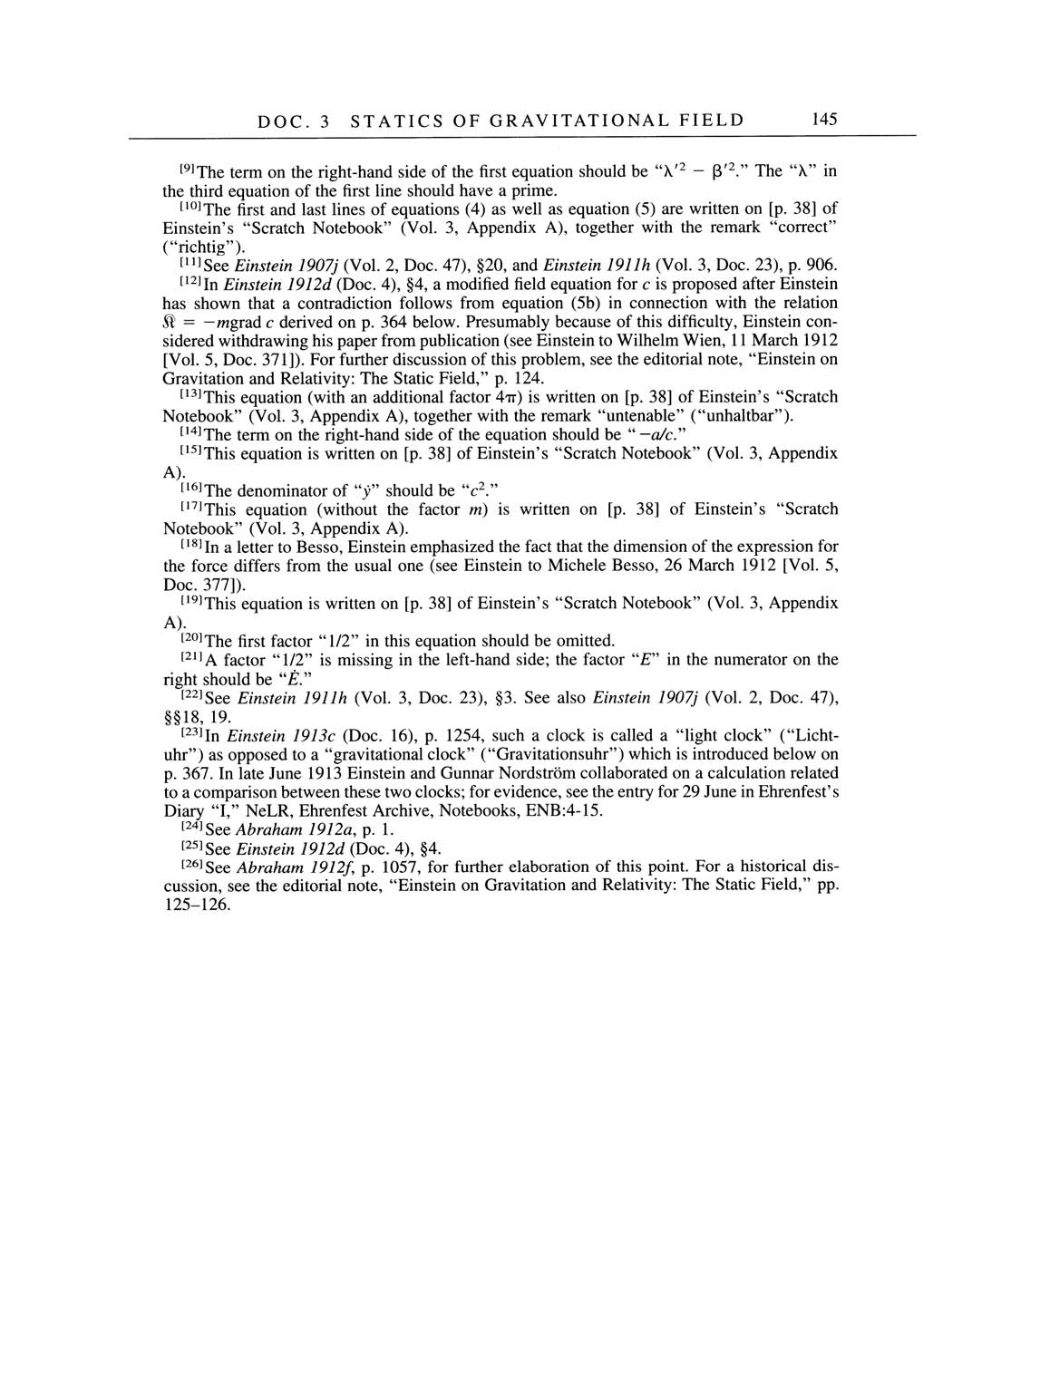 Volume 4: The Swiss Years: Writings 1912-1914 page 145